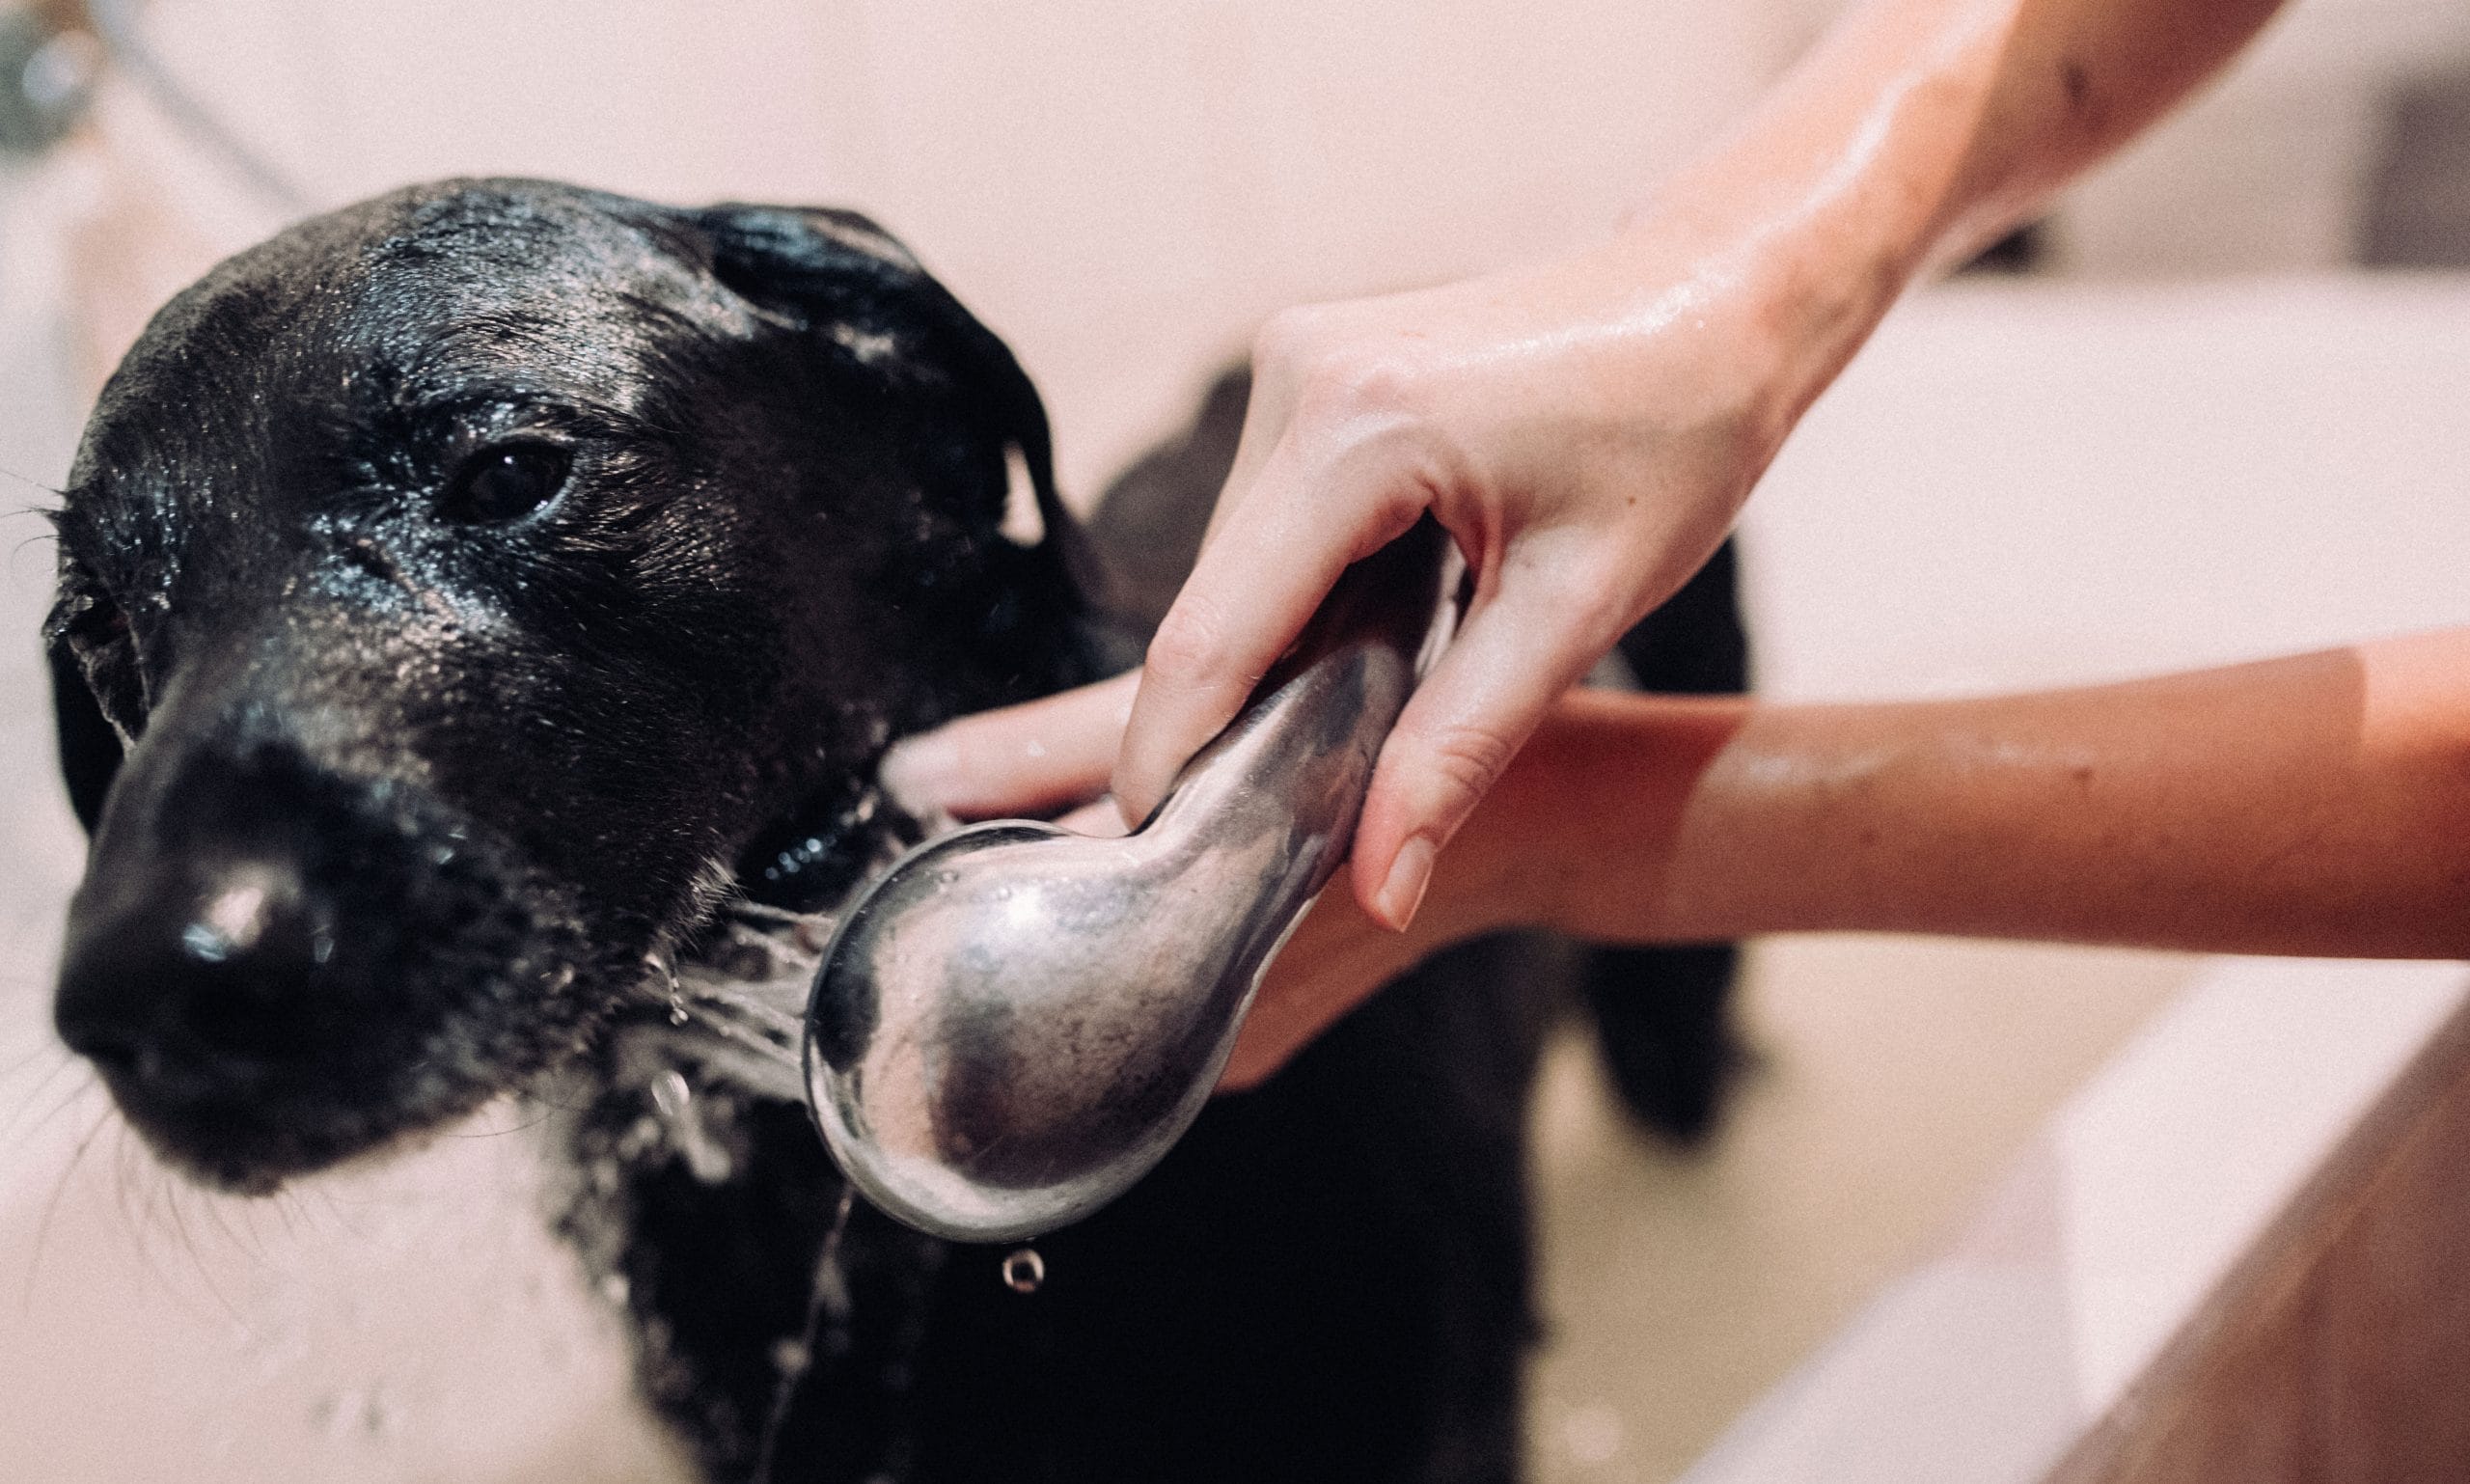 dog grooming mistakes: not rinsing dog enough